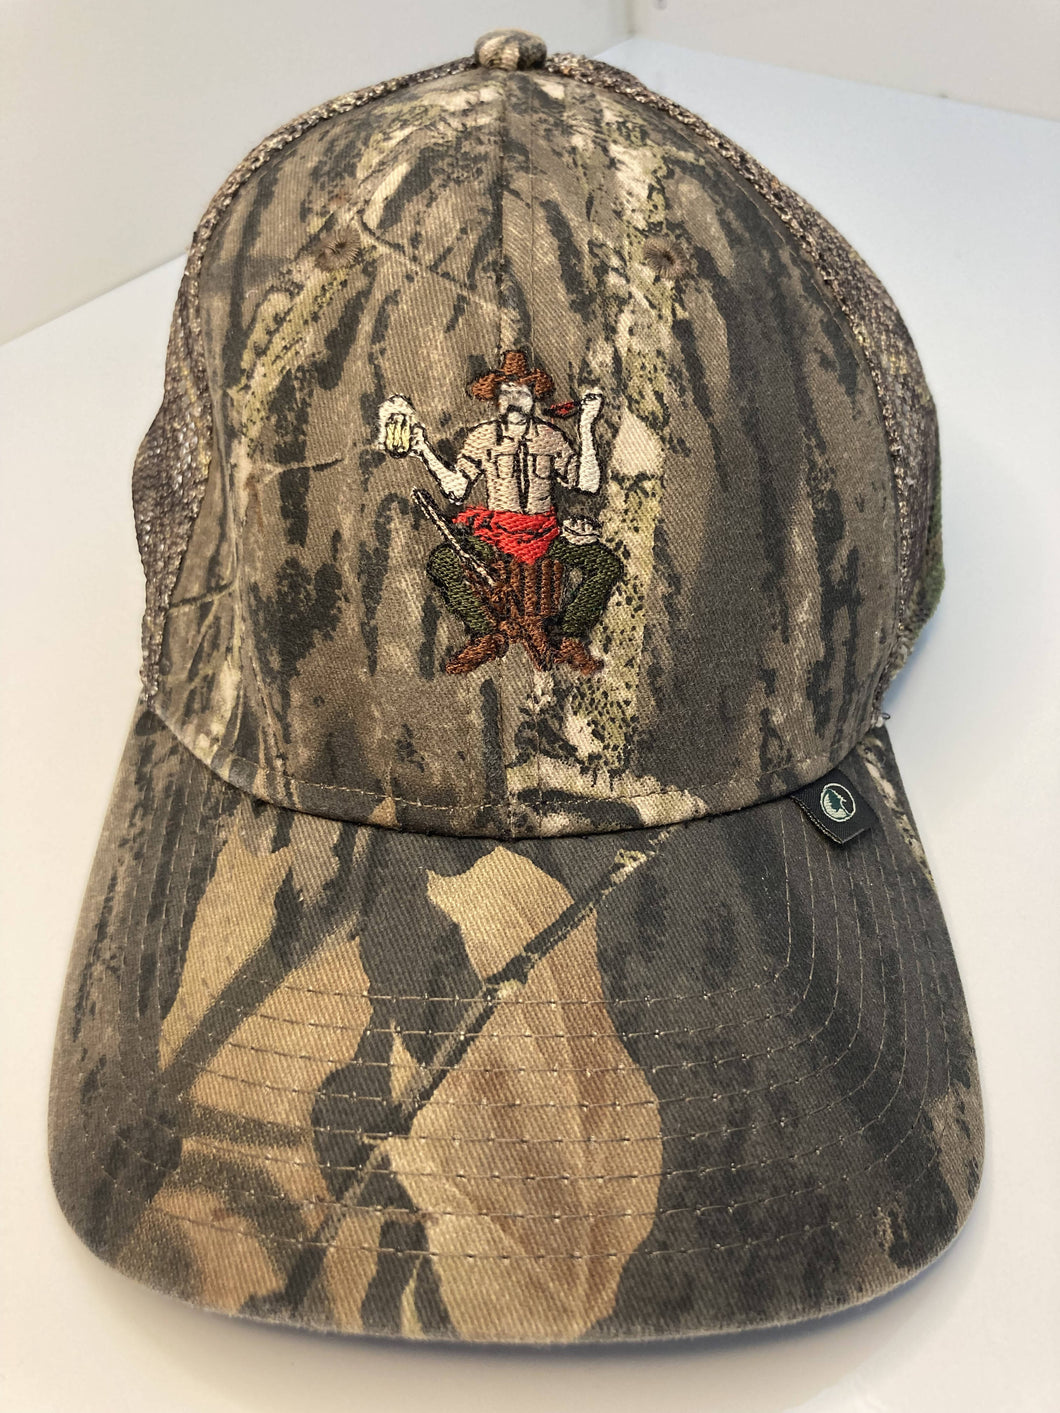 Hillbilly Hunter Embroidery Cap Hat